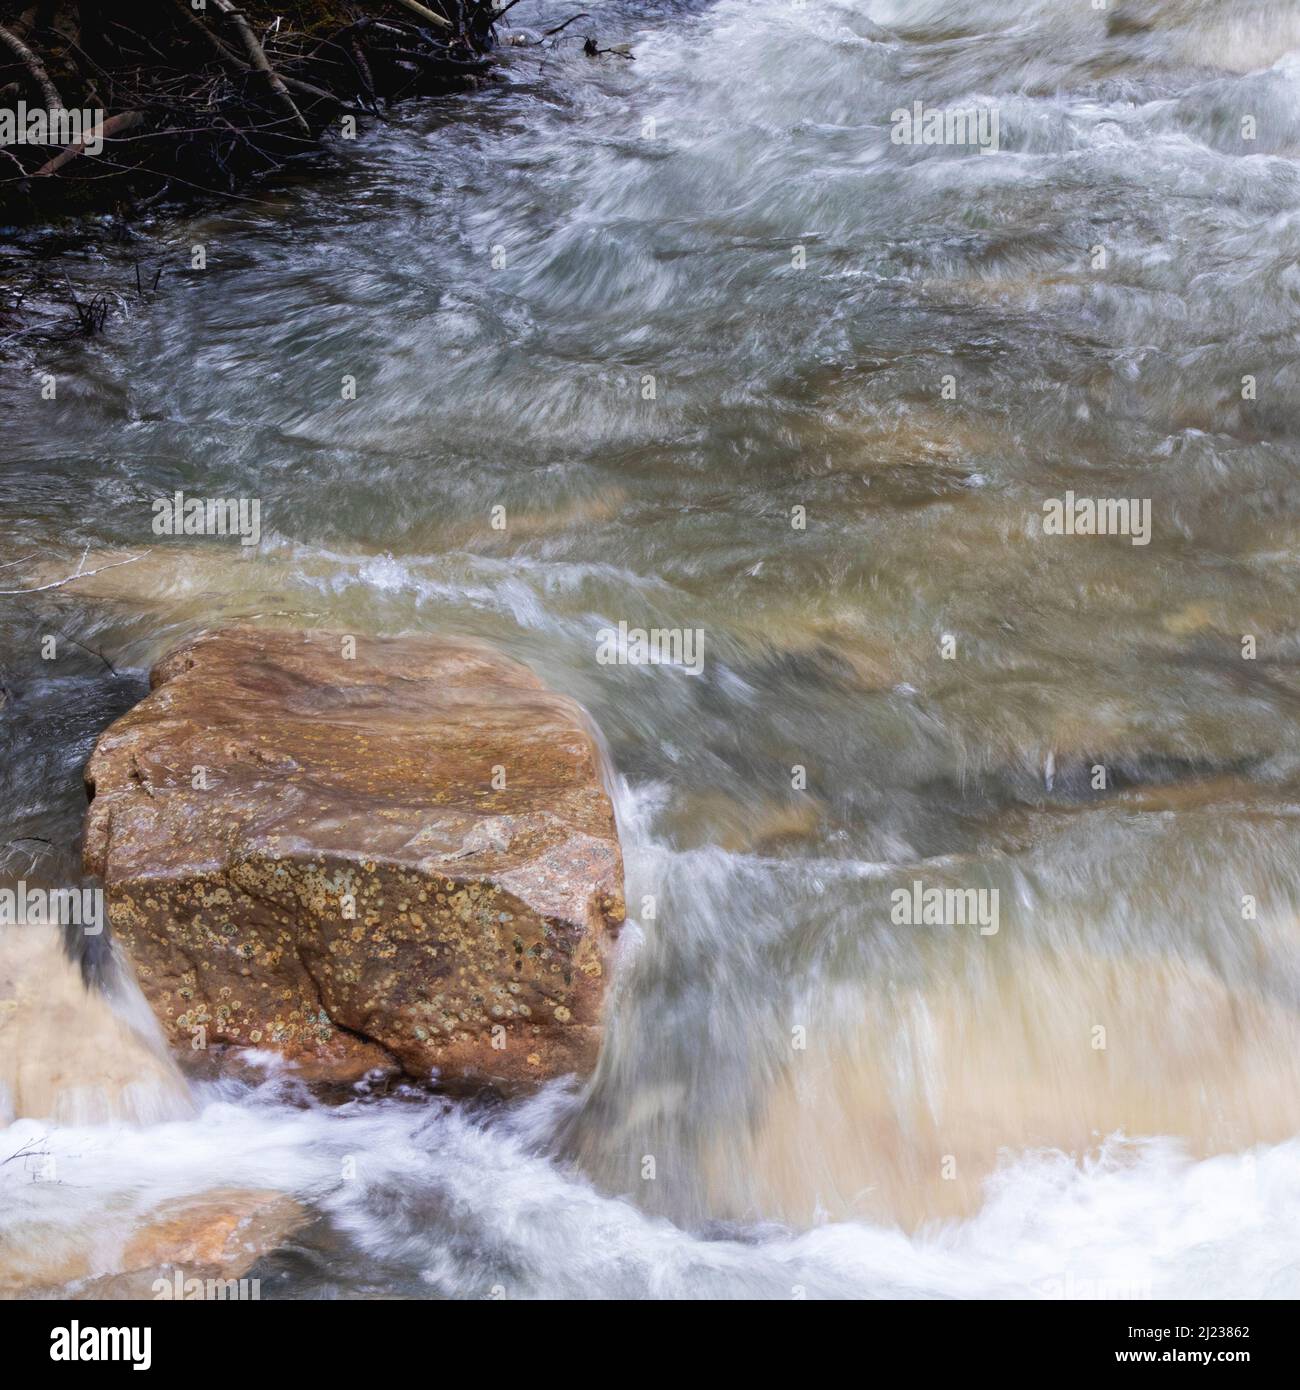 Beautiful Natural stone sits isolates against the flowing water of a running stream or brook Stock Photo